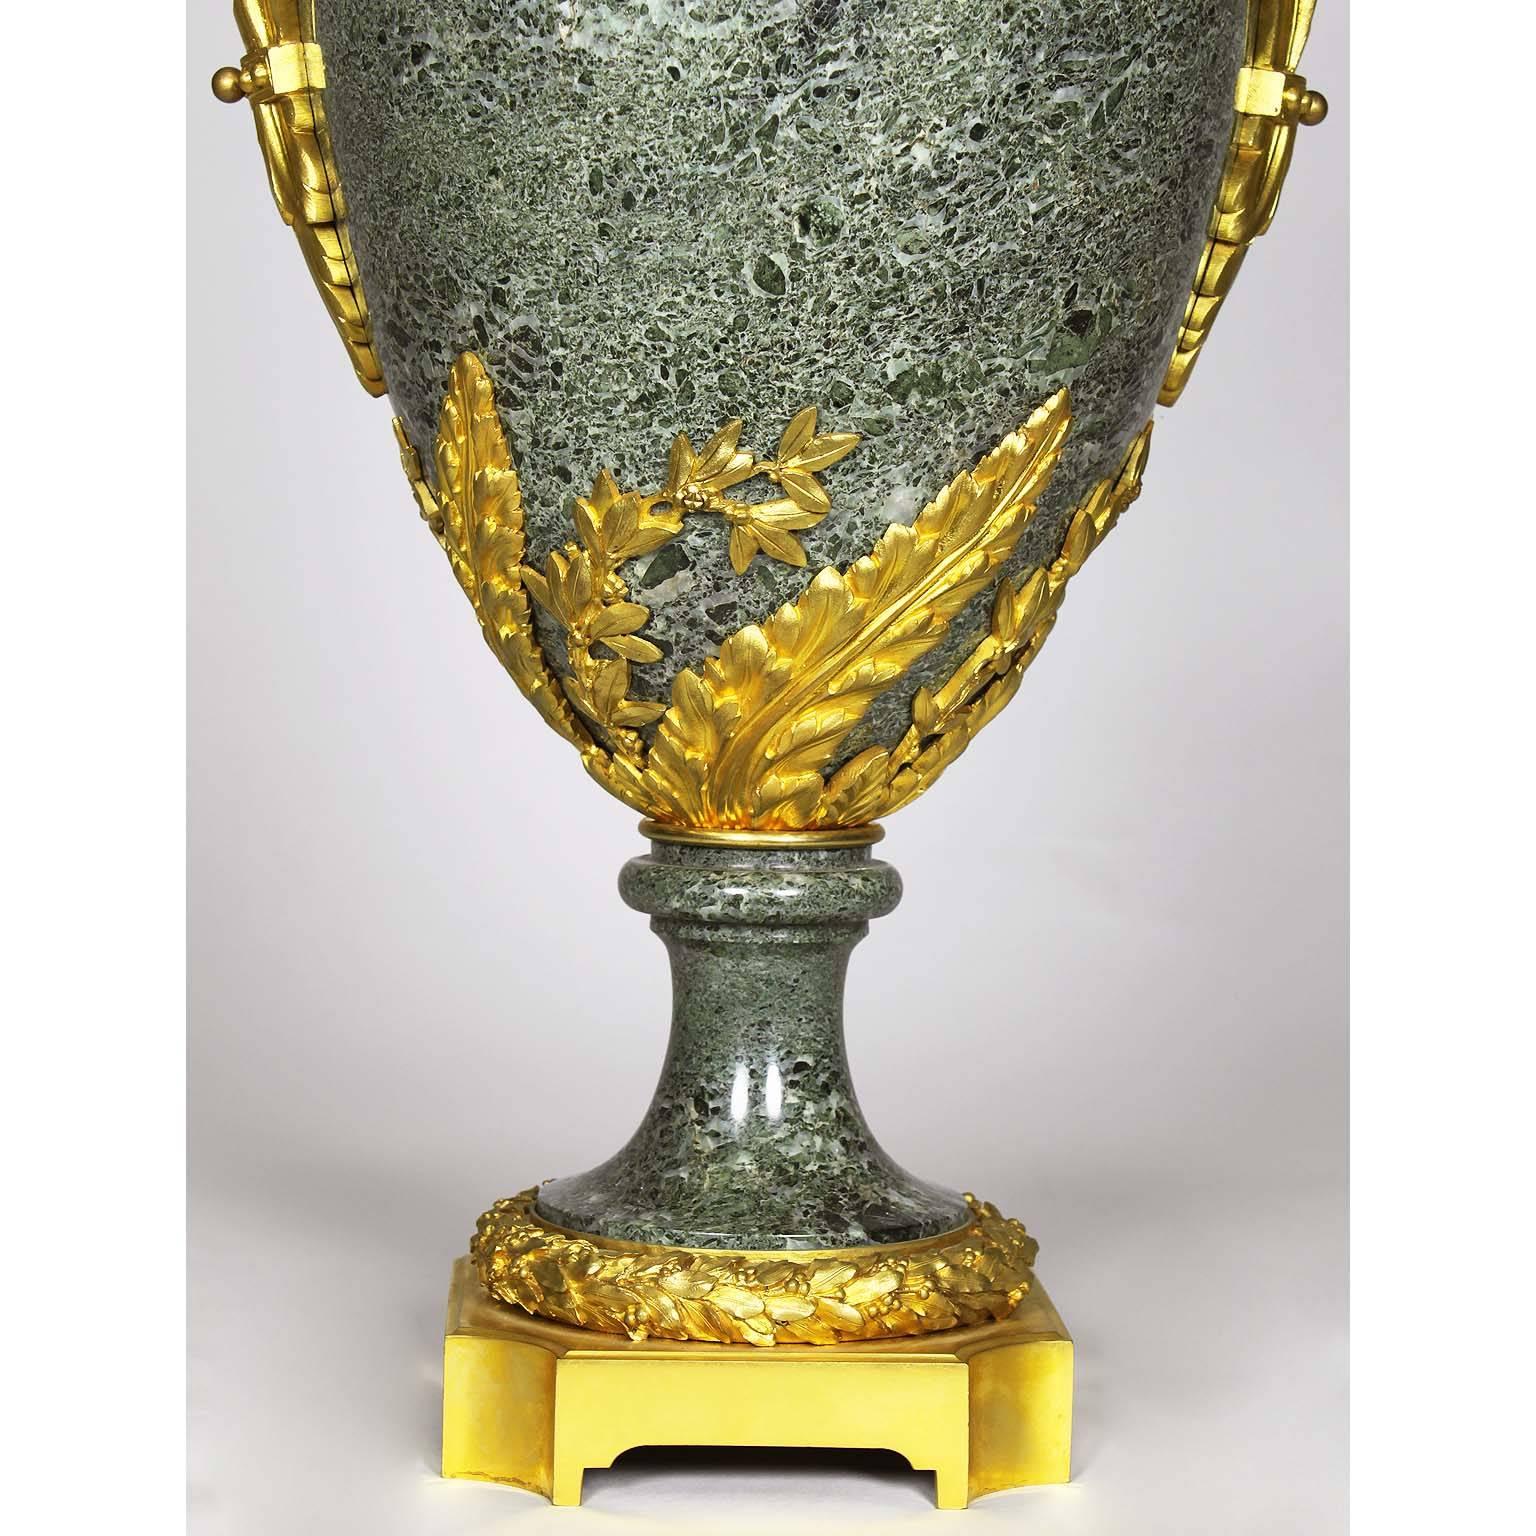 French 19th-20th Century Louis XVI Style Gilt-Bronze & Marble Urn with Children In Good Condition For Sale In Los Angeles, CA